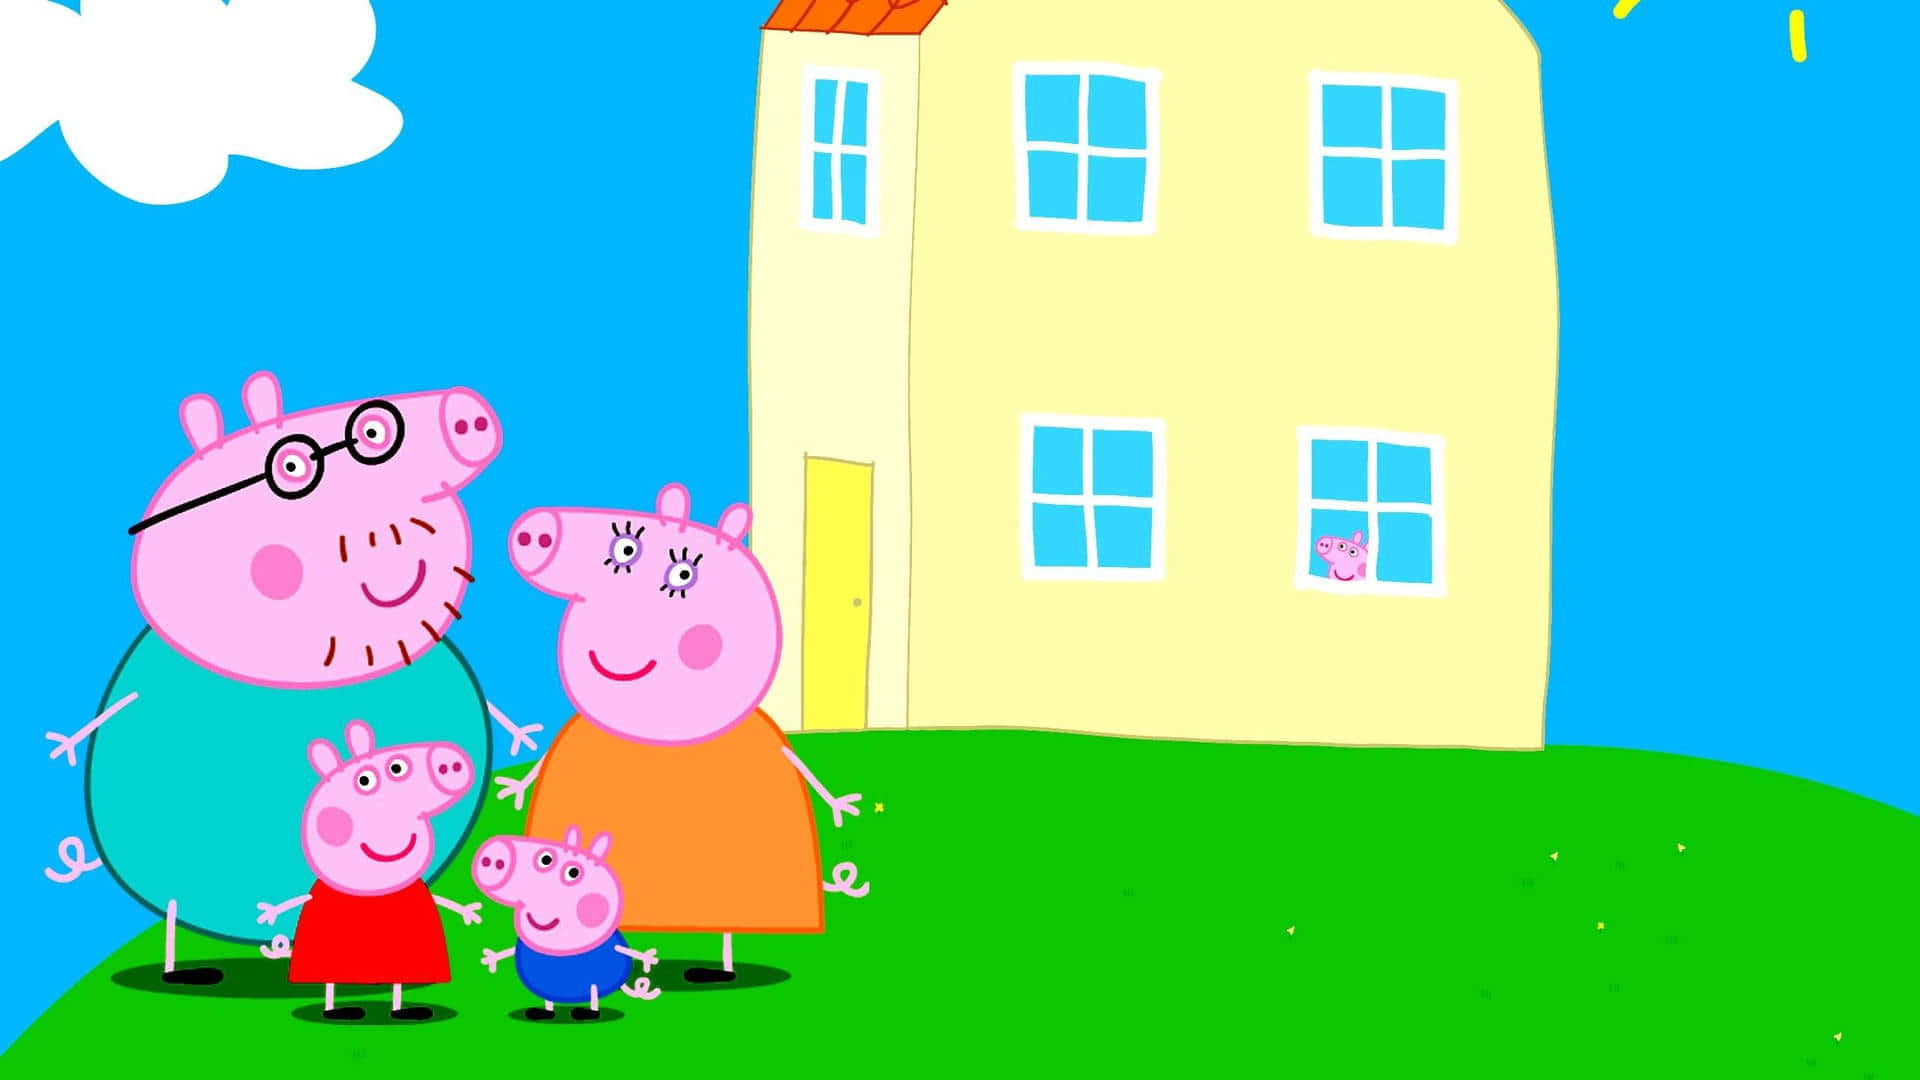 The Peppa Pig Family enjoys a fun afternoon outdoors.